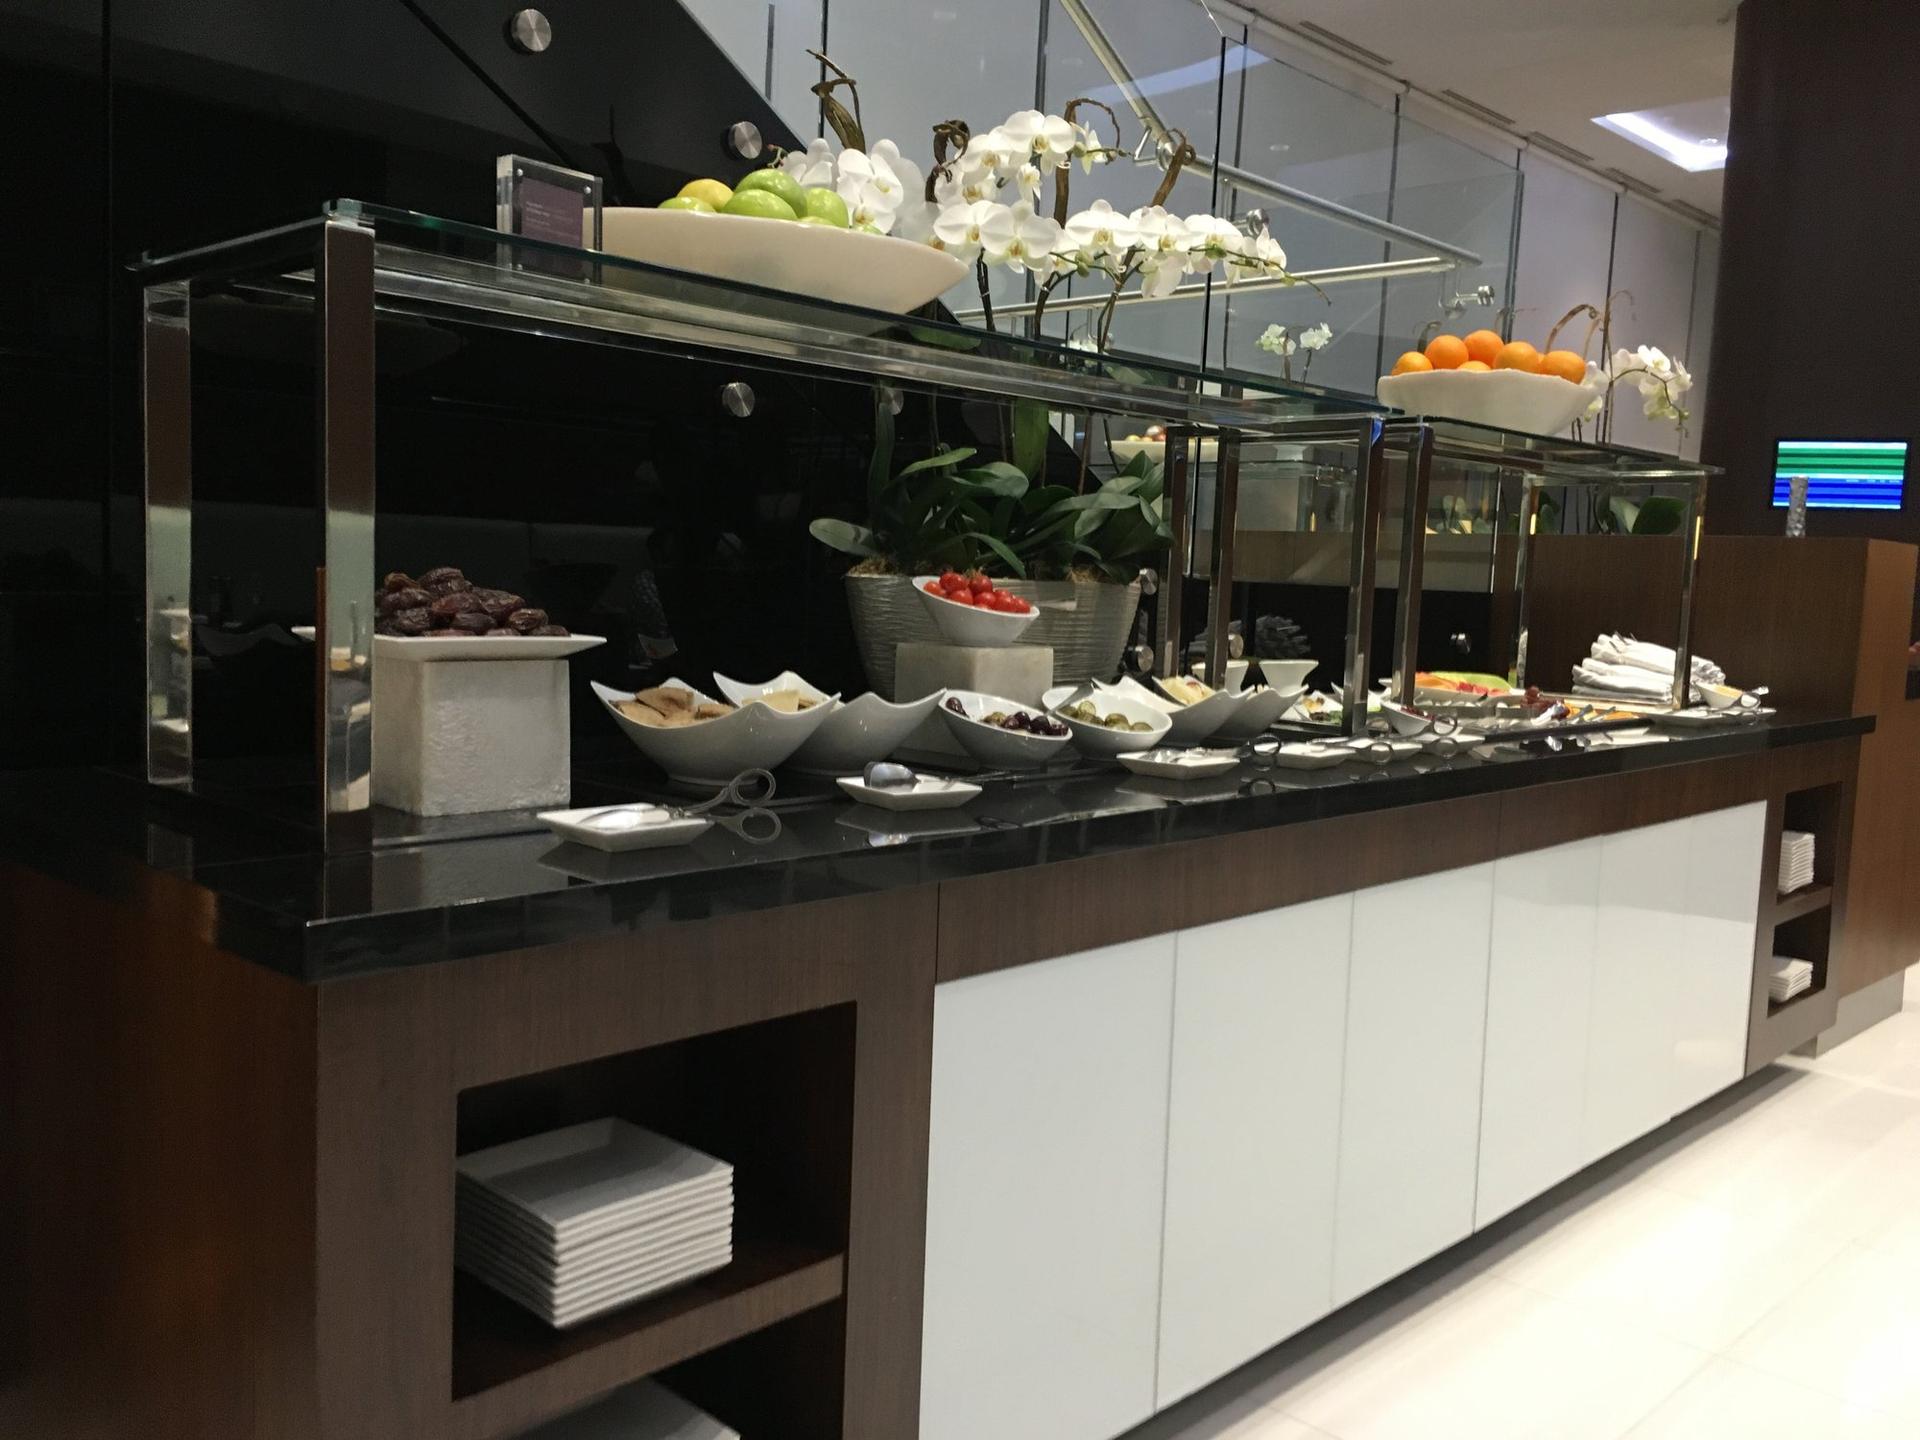 Etihad Airways First & Business Class Lounge image 15 of 17